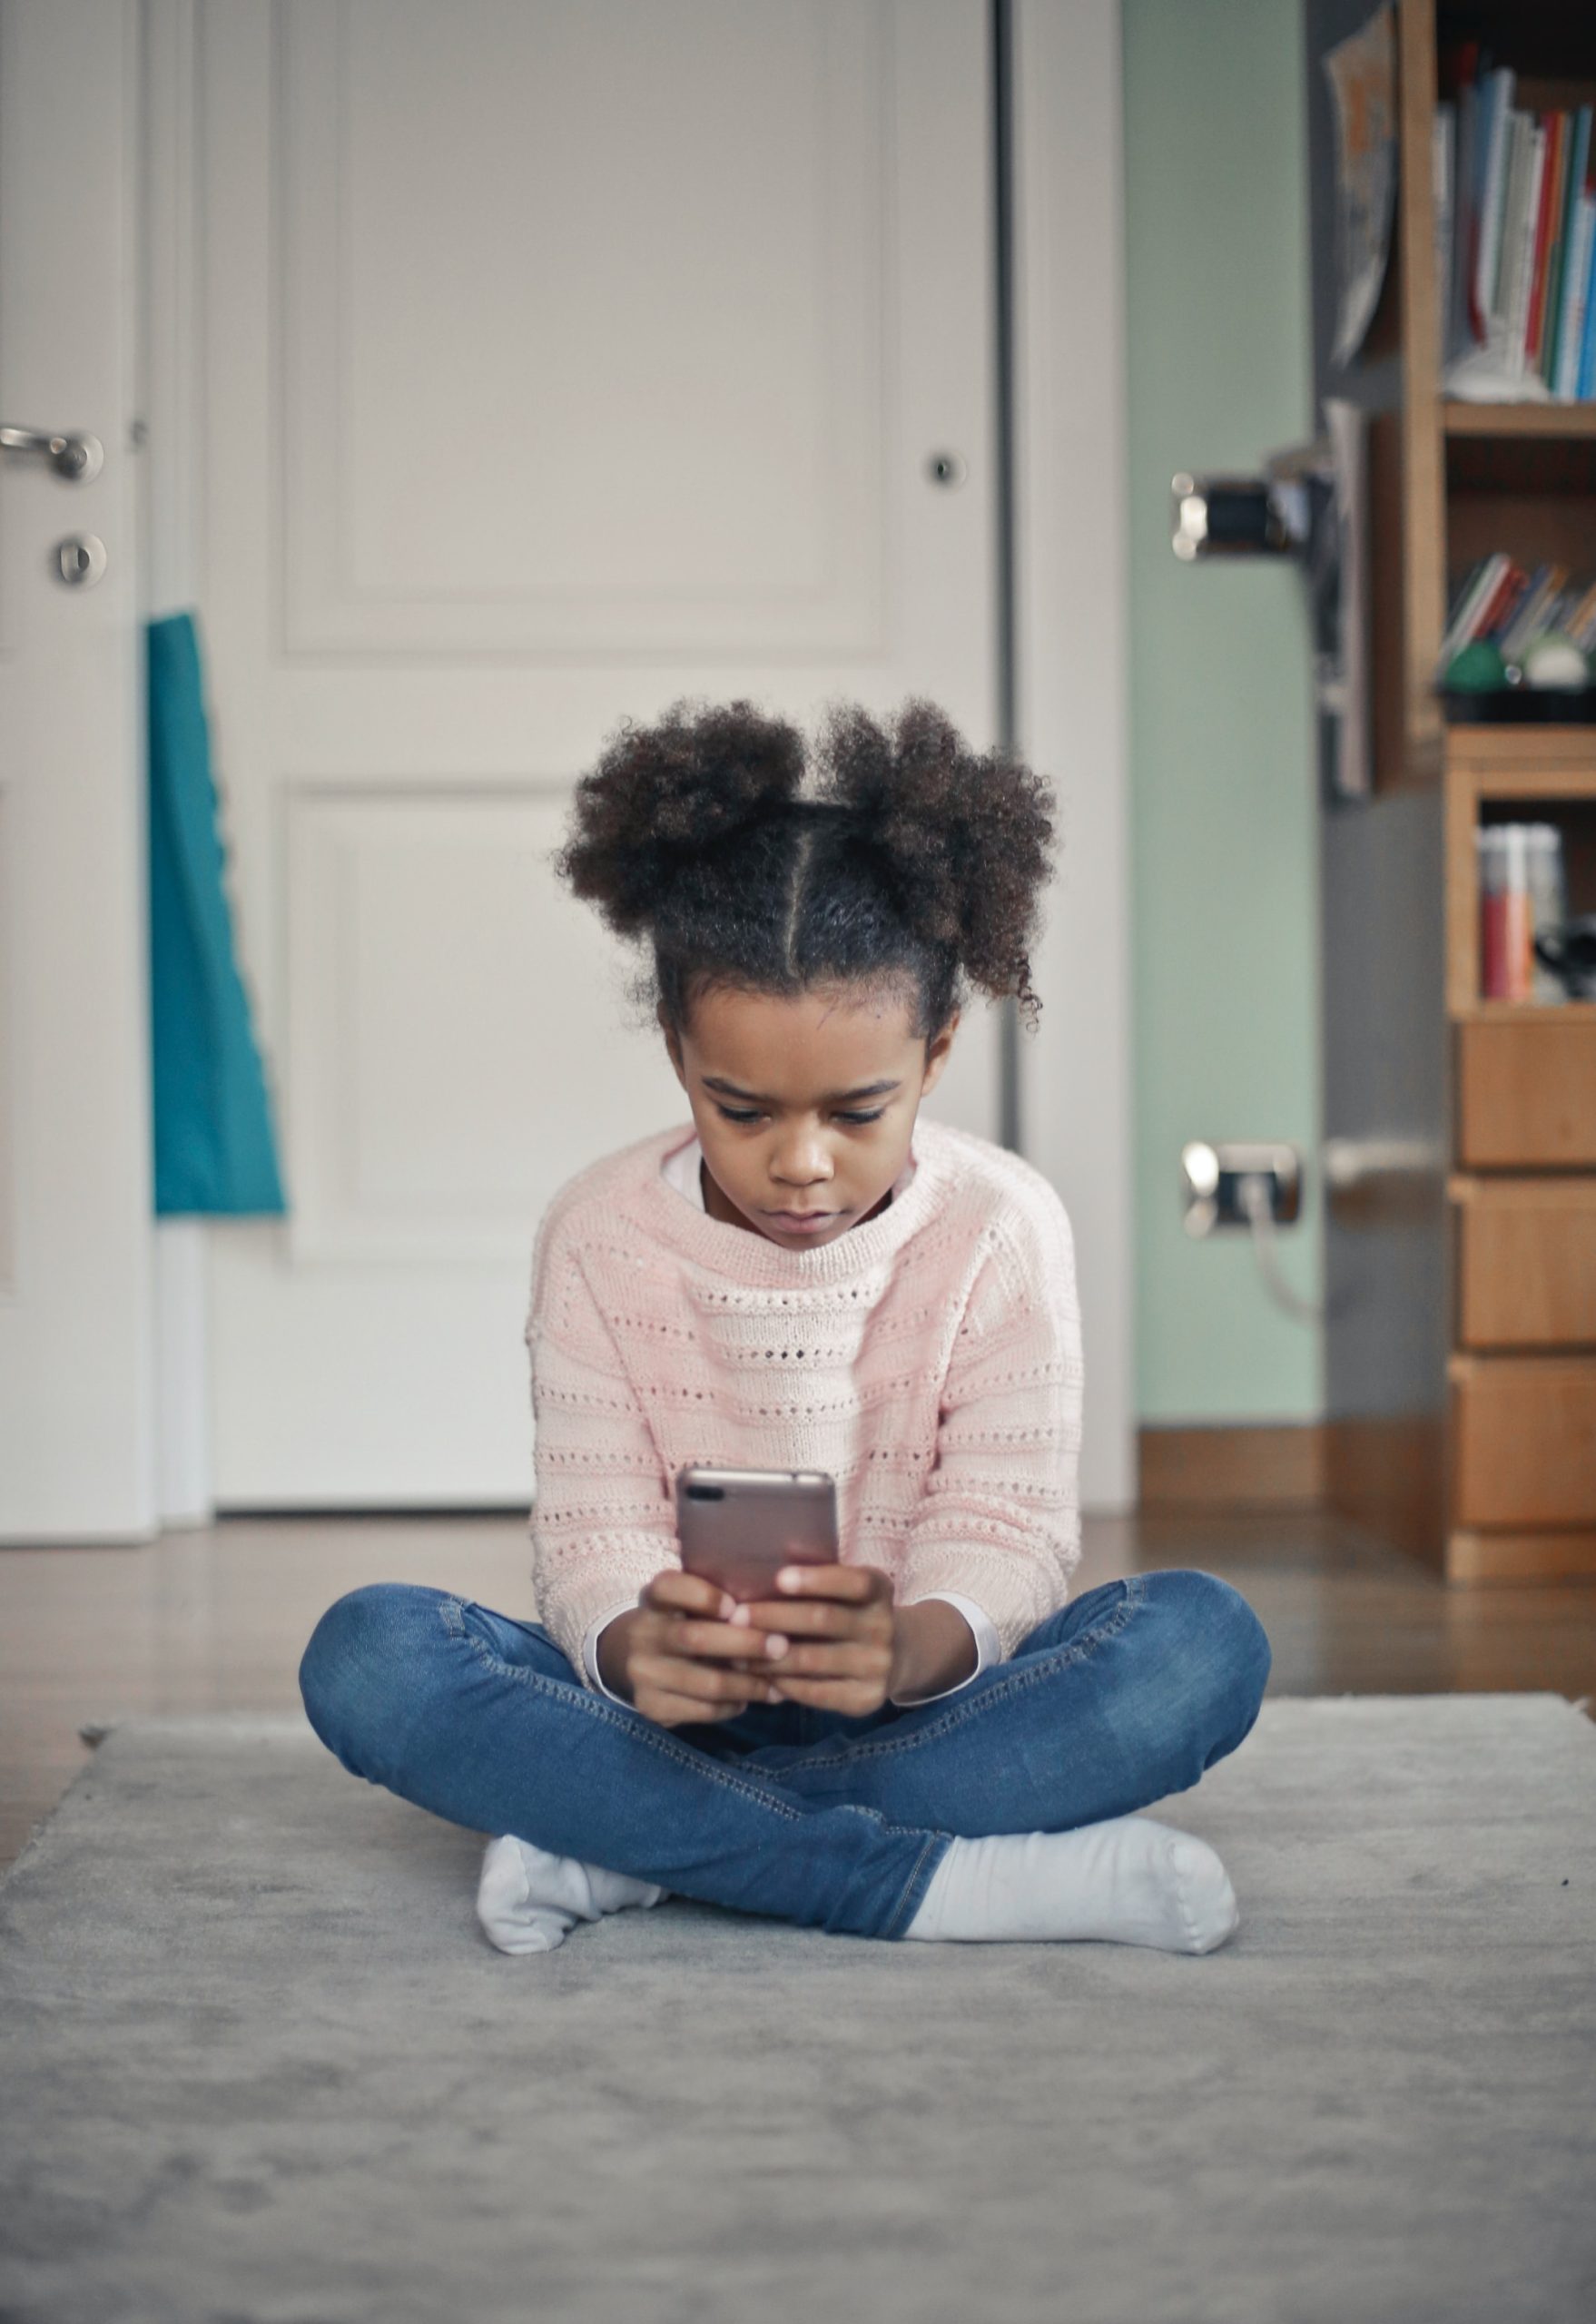 Cyberbullying intervention strategies for parents